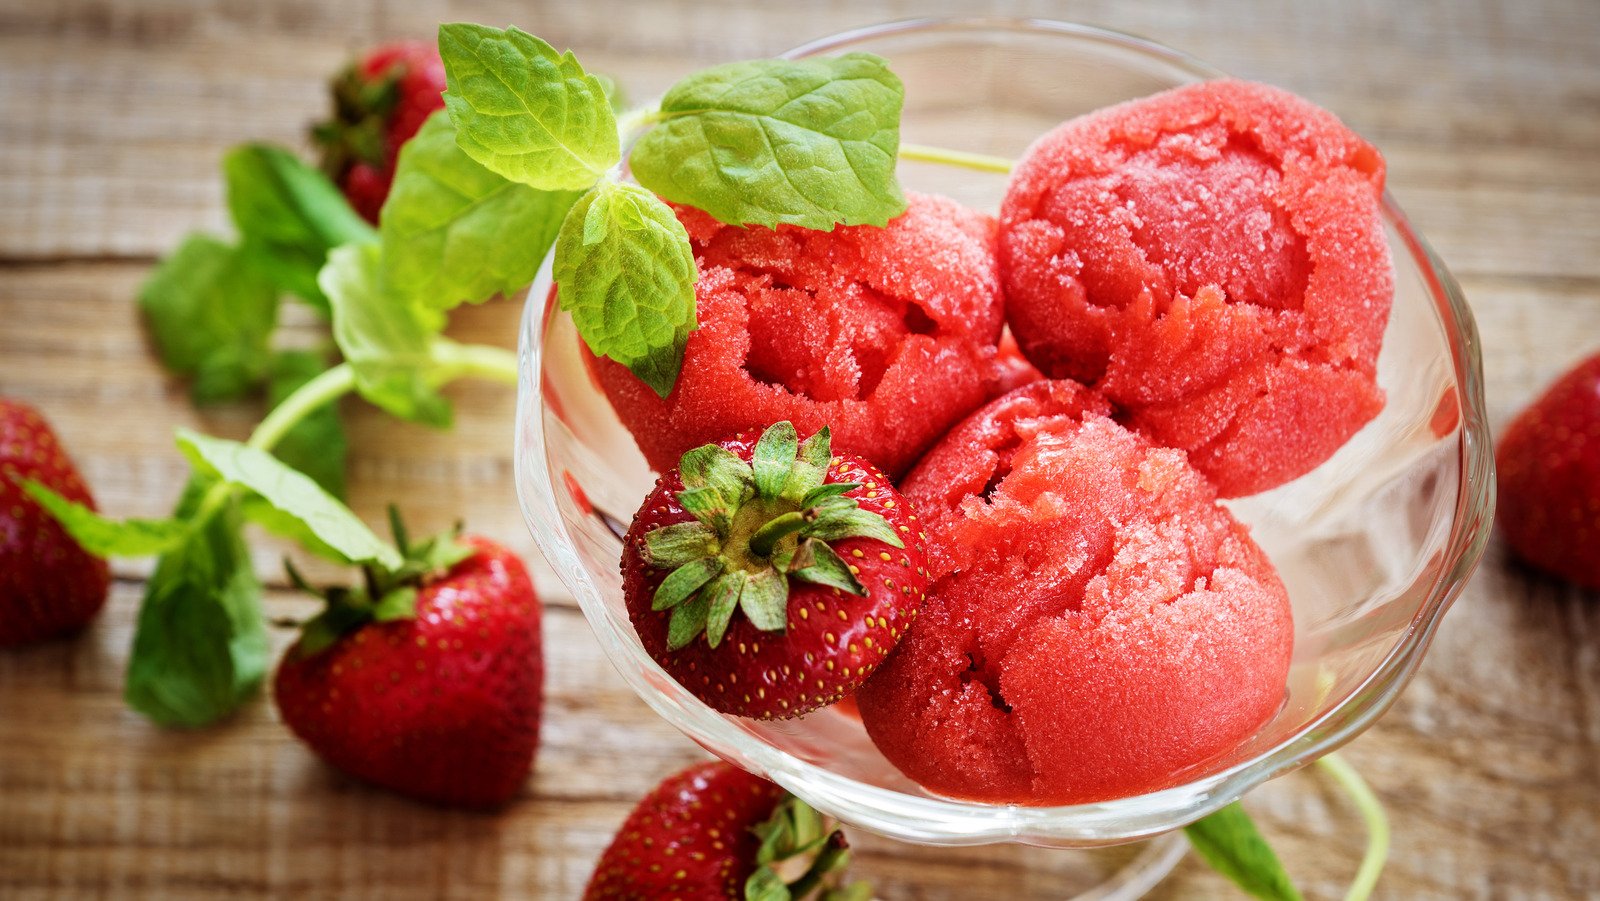 Sherbet Vs. Sorbet: What's The Difference?